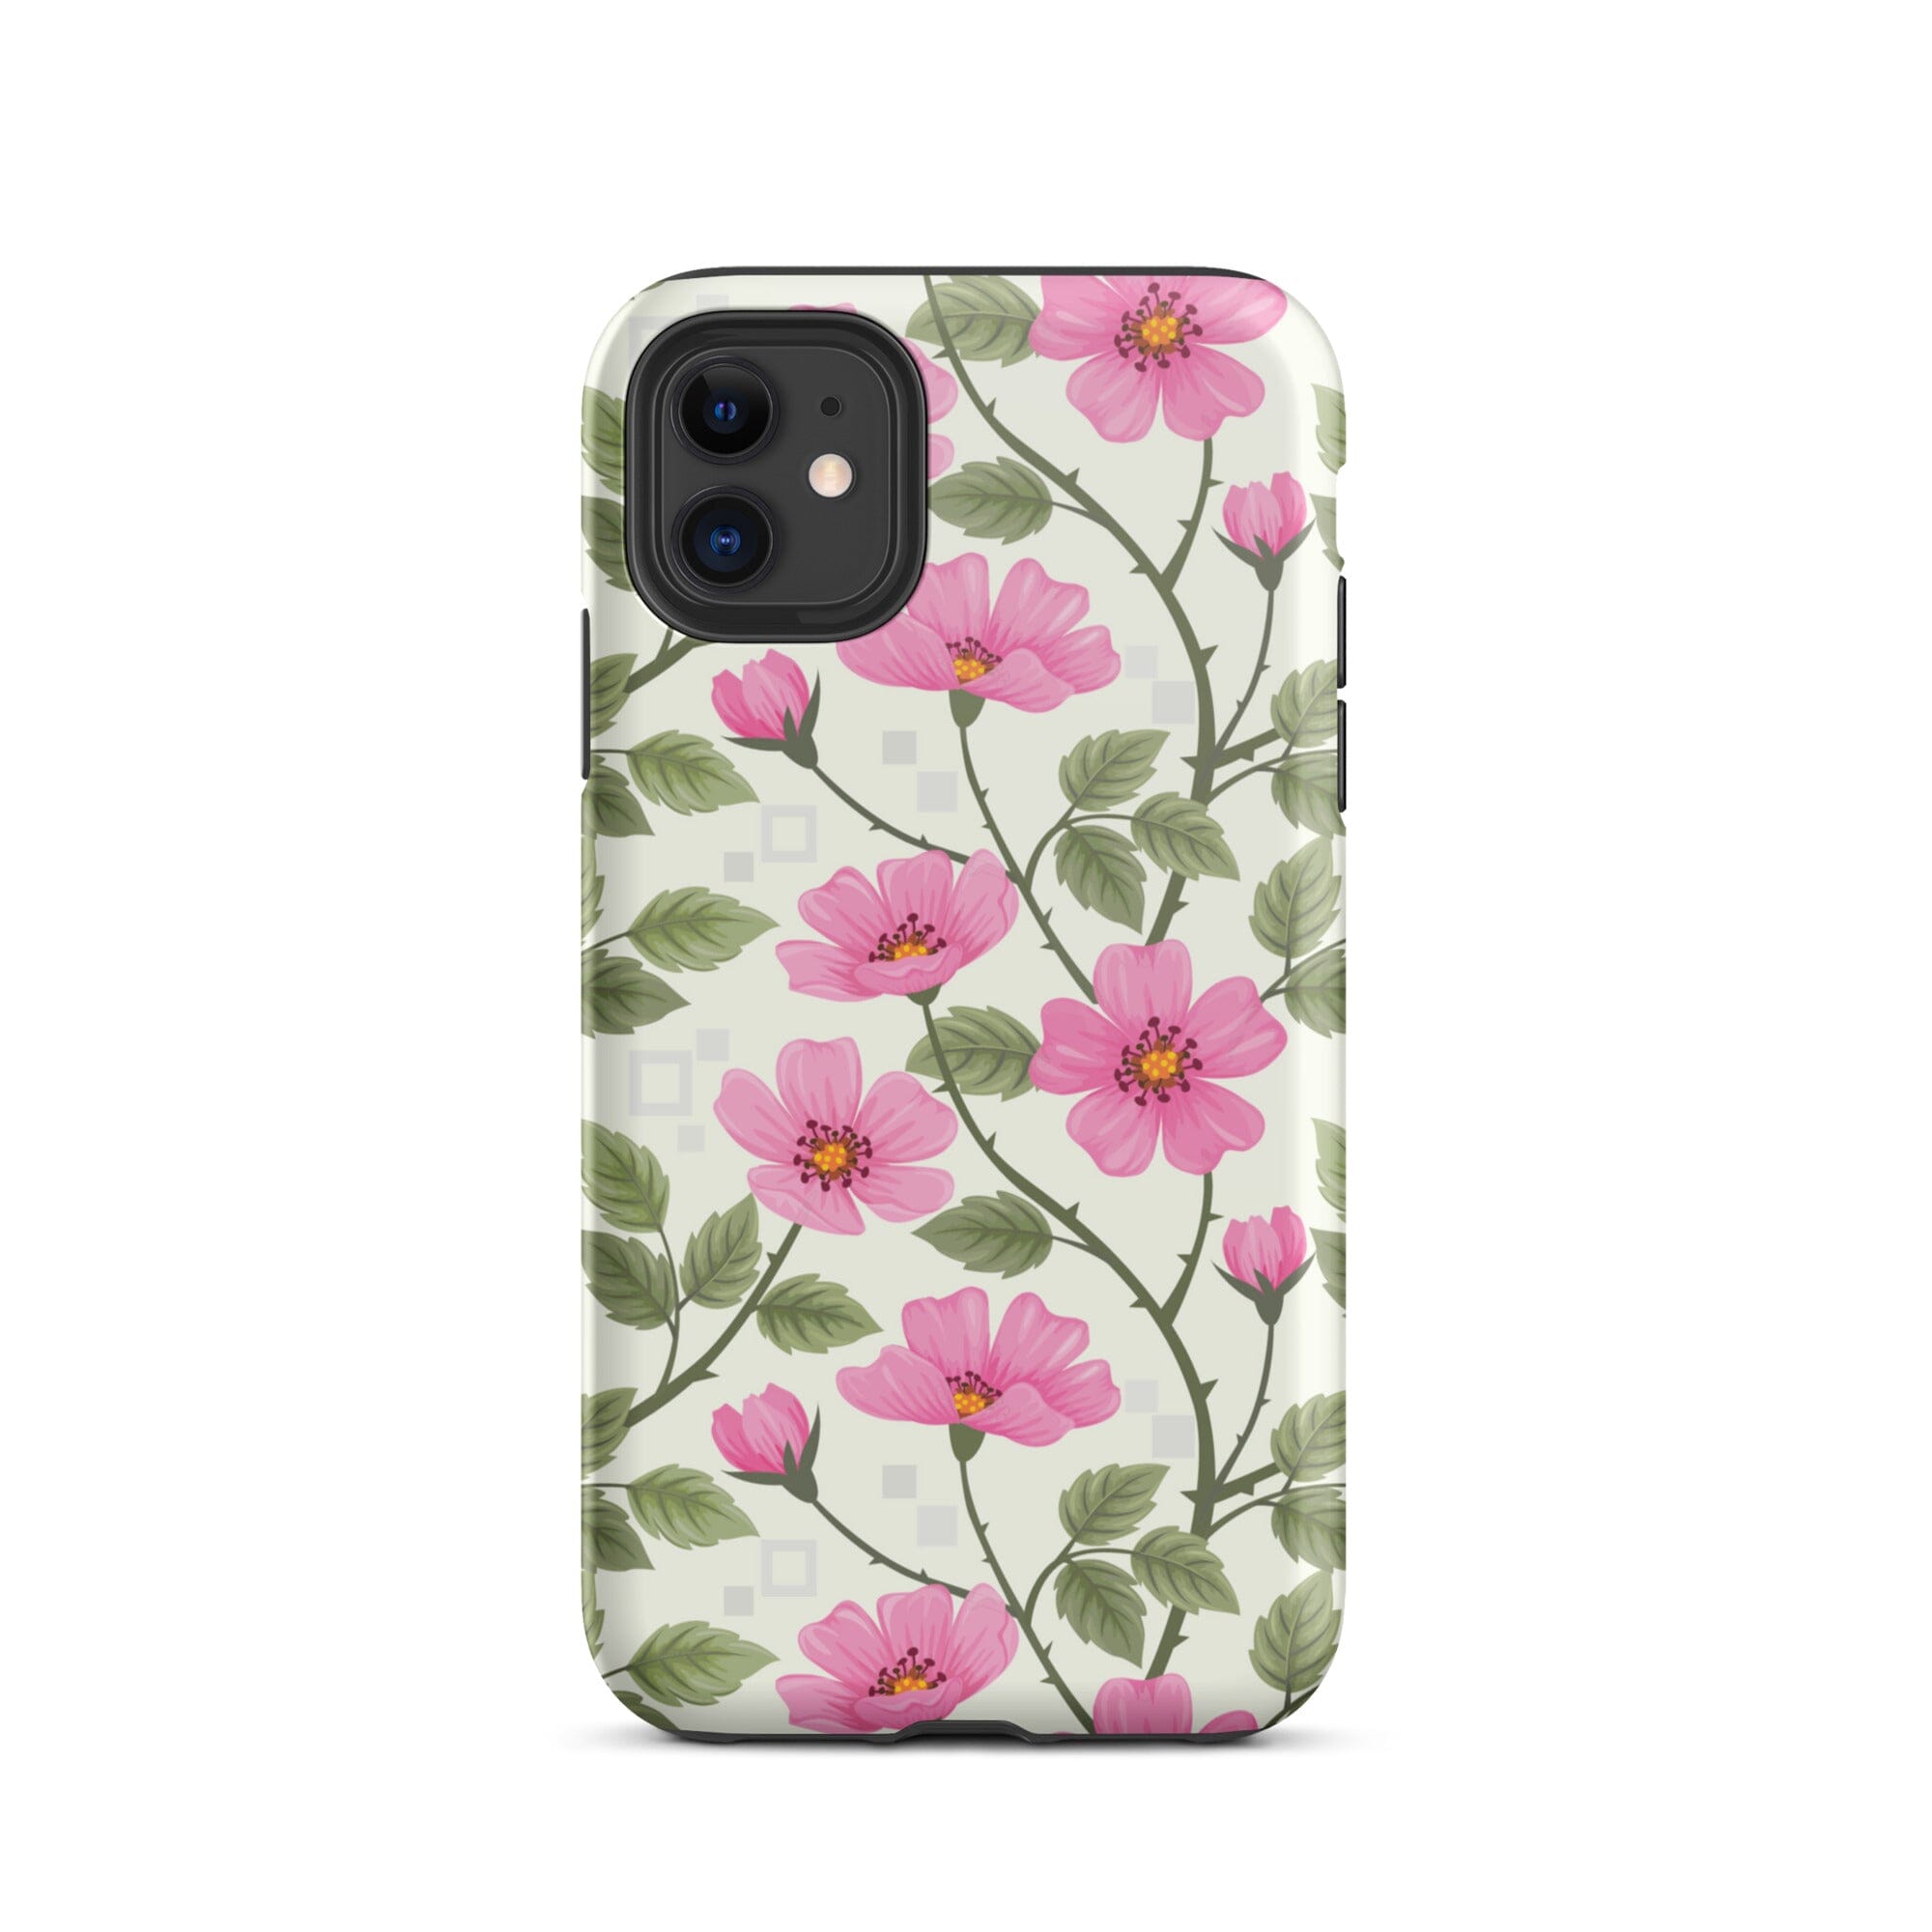 Sassy Florals iPhone Case Knitted Belle Boutique iPhone 11 